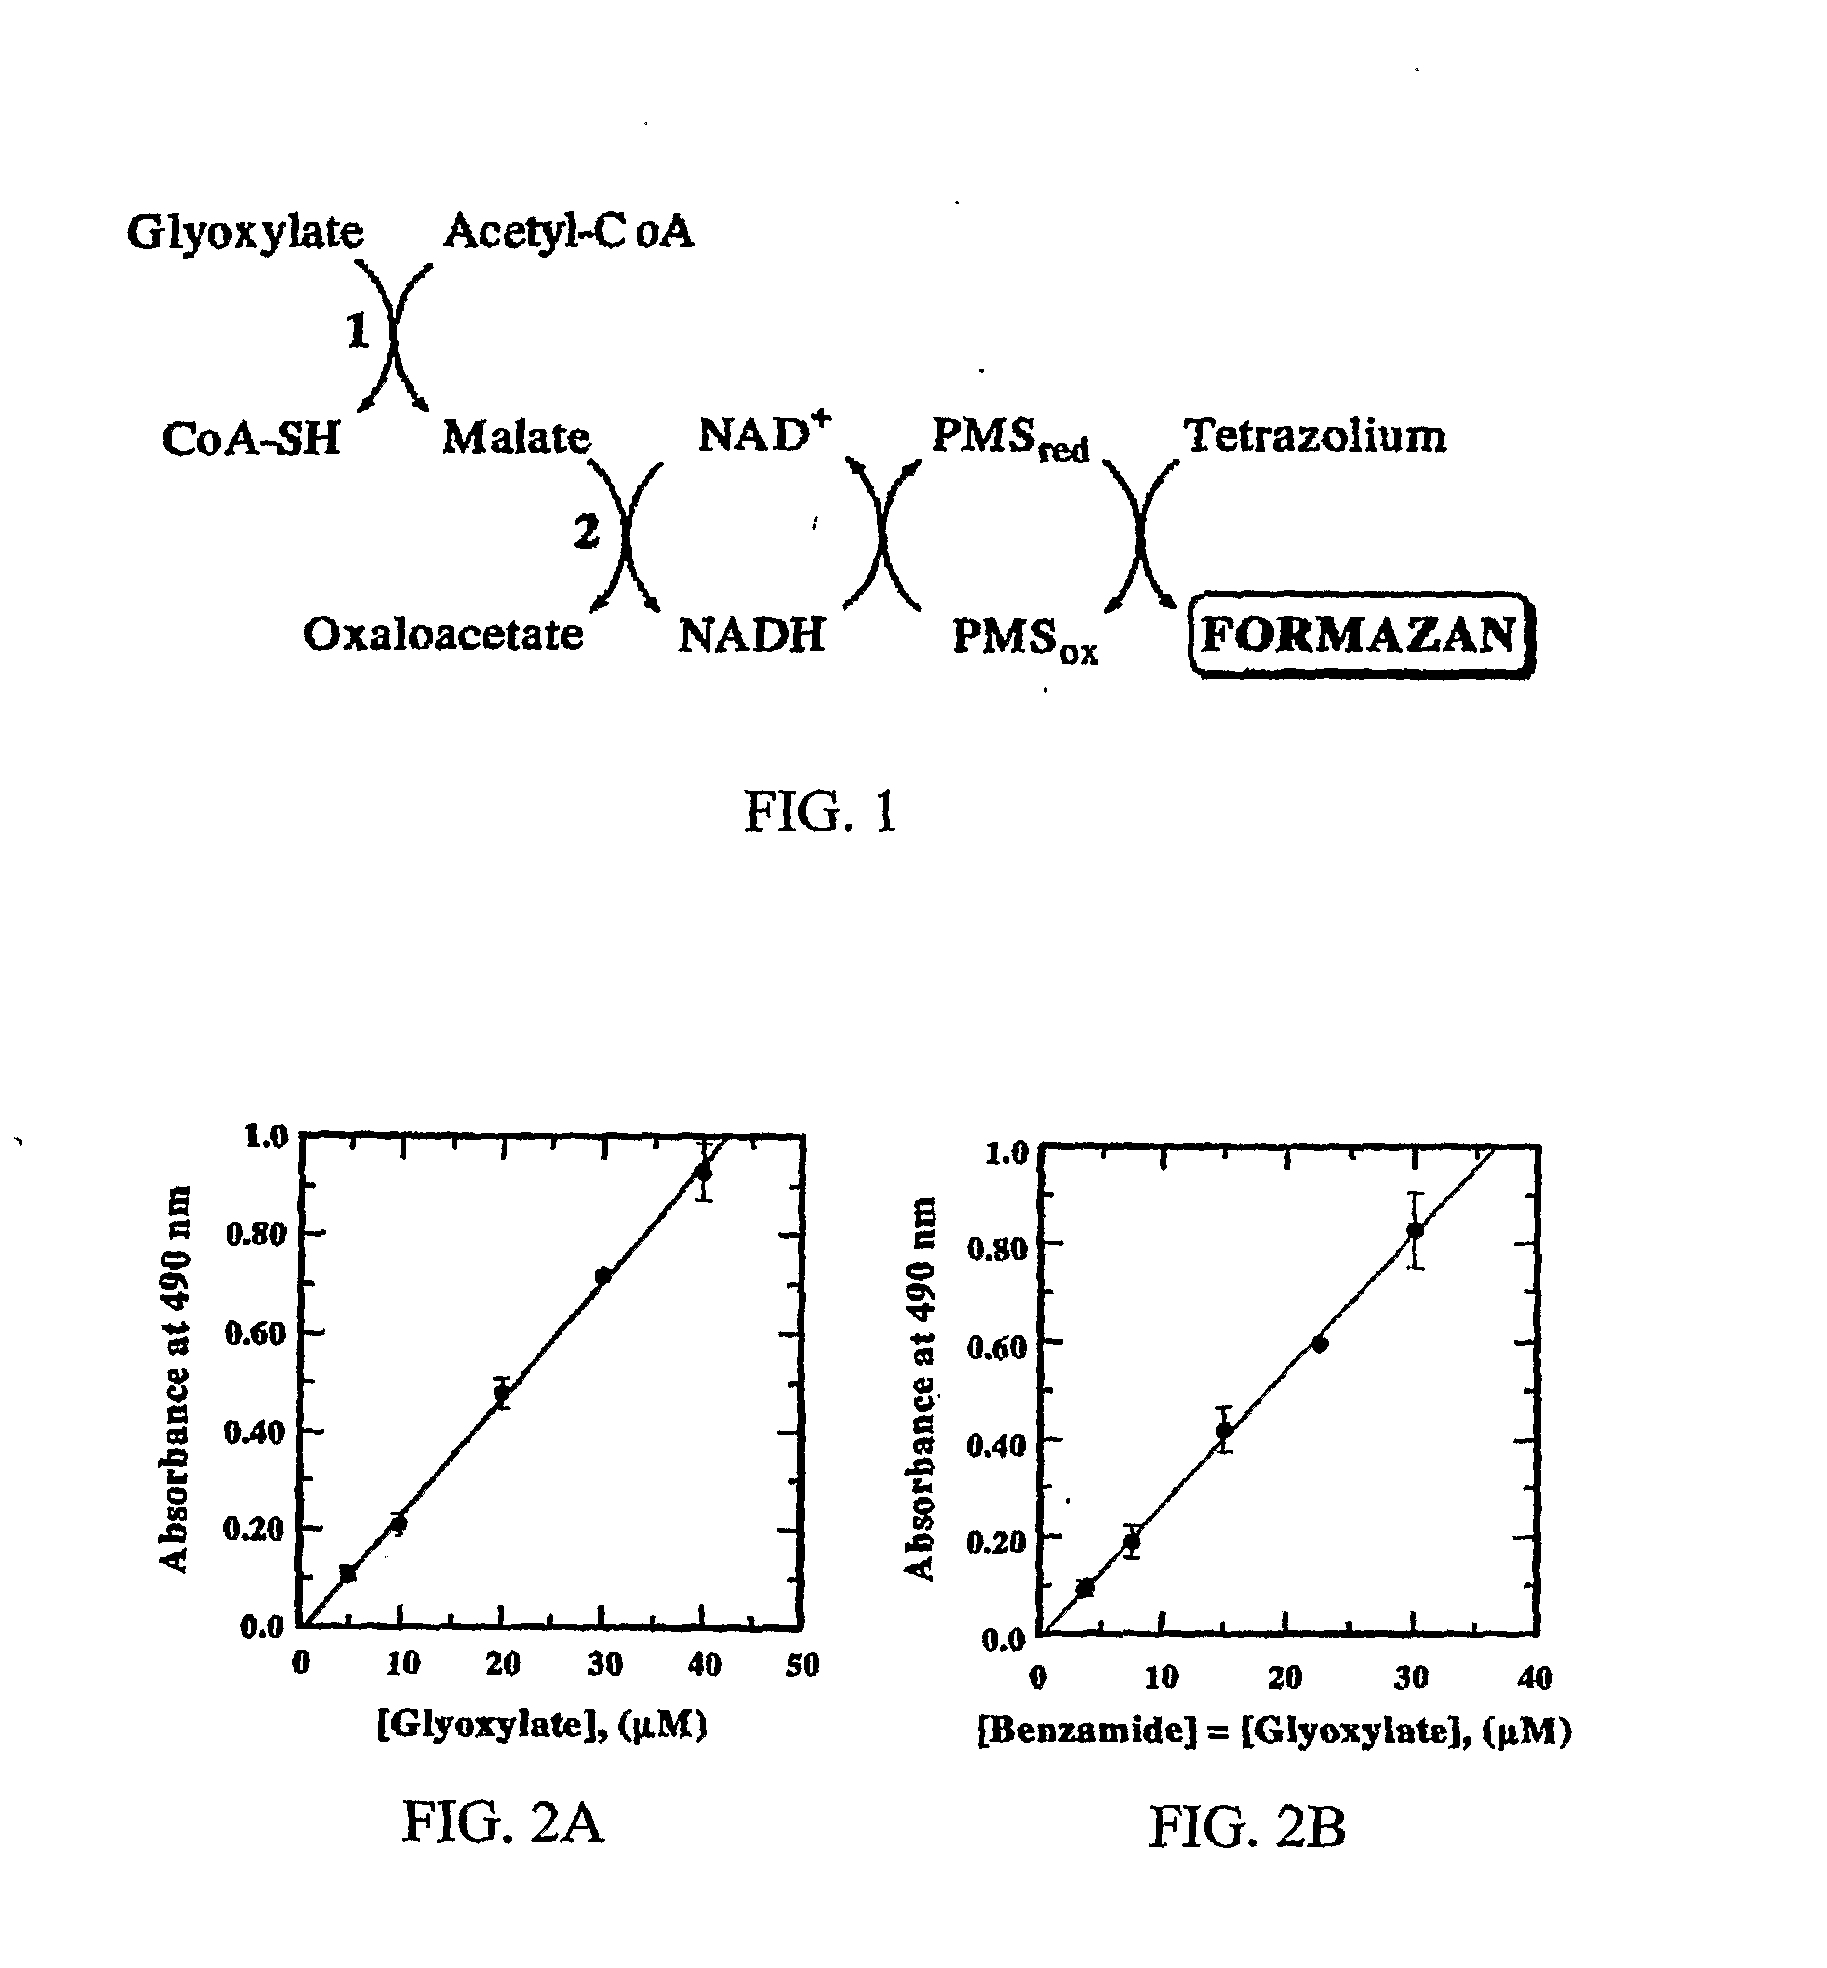 Materials and Methods for Assaying for Glyoxylate